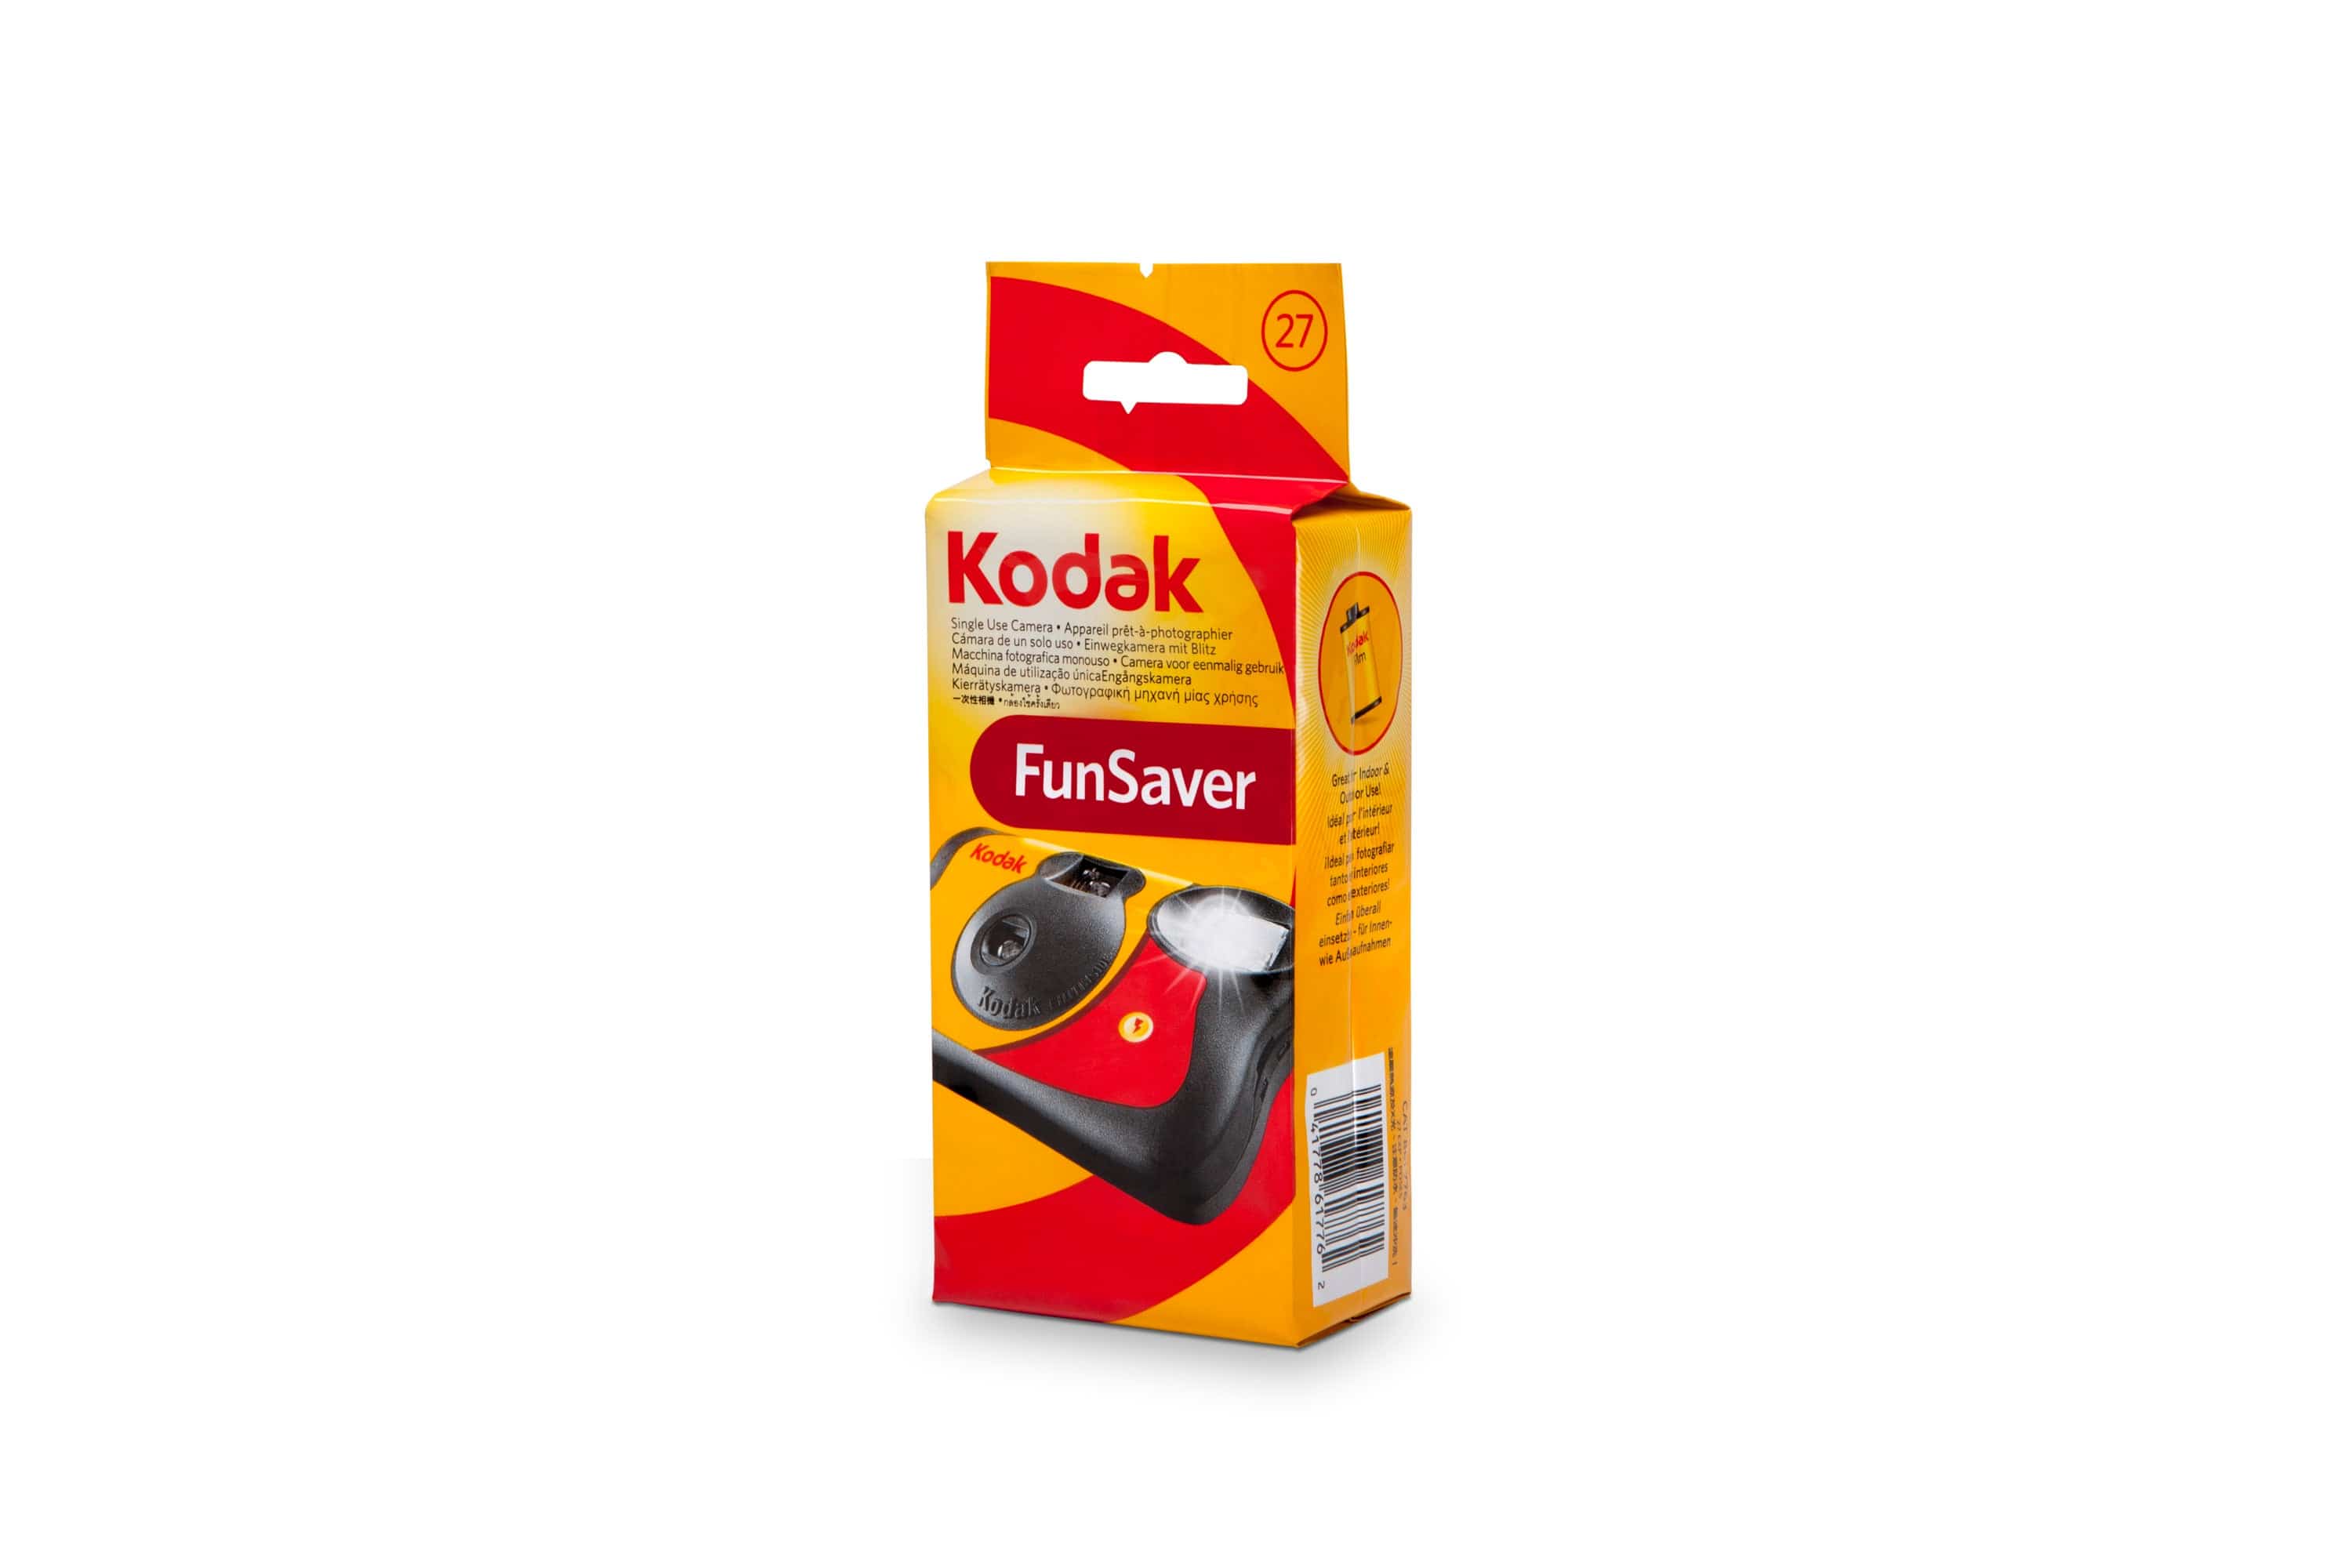 KODAK, Funsaver 27 One Time Use Disposable Camera w/Flash ISO 800 -  (10-Pack) *FREE SHIPPING*, 8617763-10